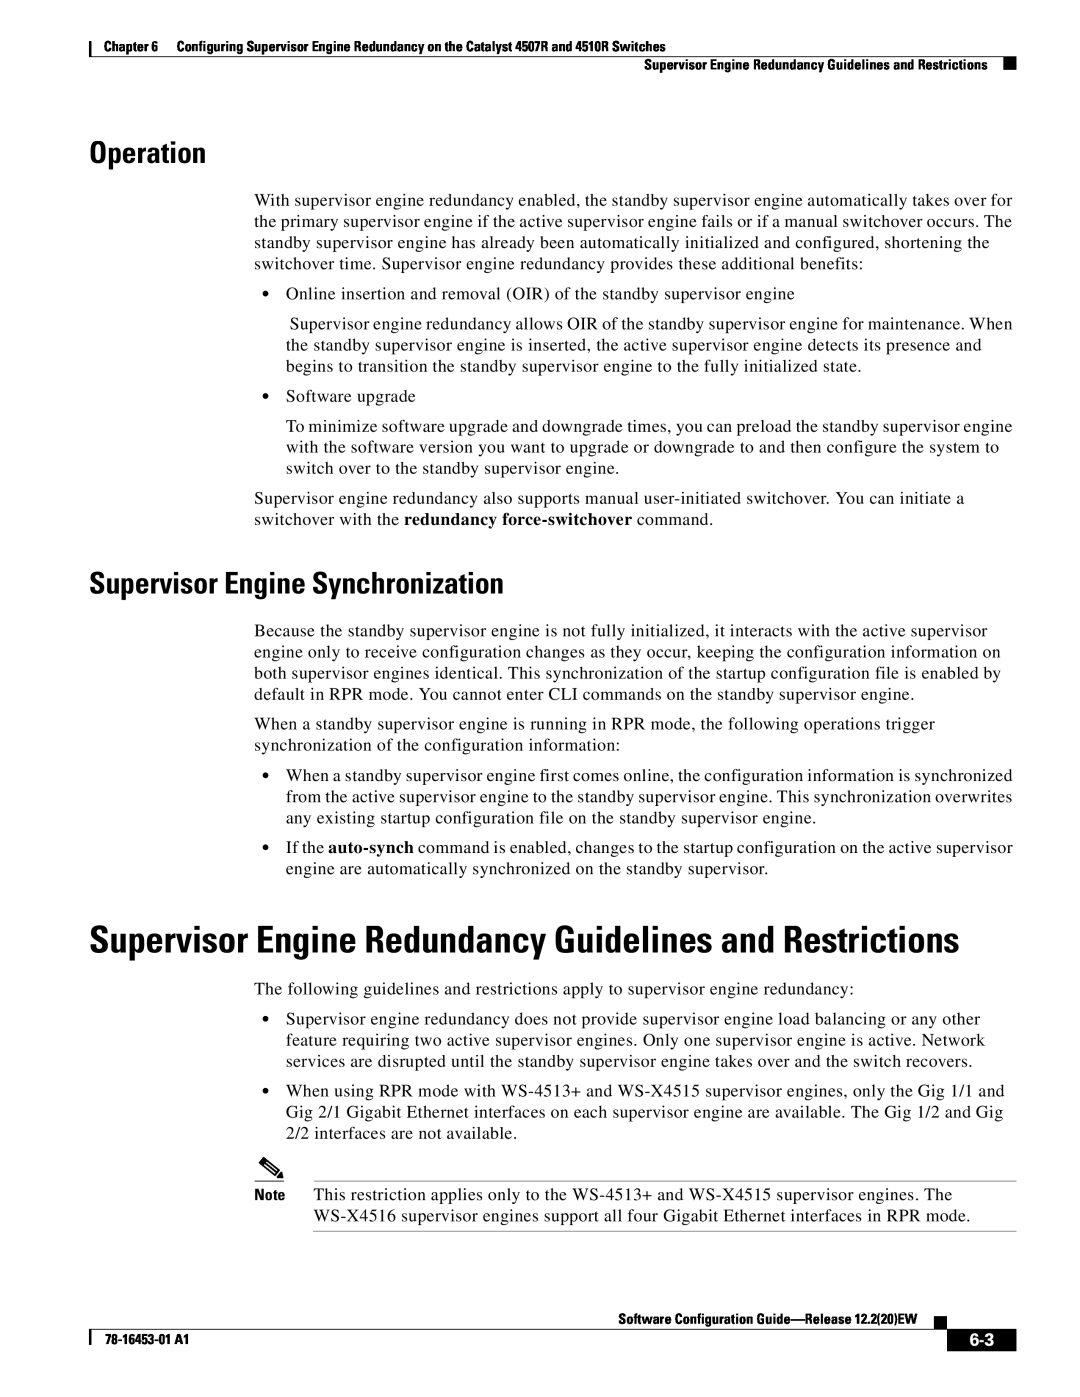 Cisco Systems WSC4507RE96V manual Supervisor Engine Redundancy Guidelines and Restrictions, Operation 